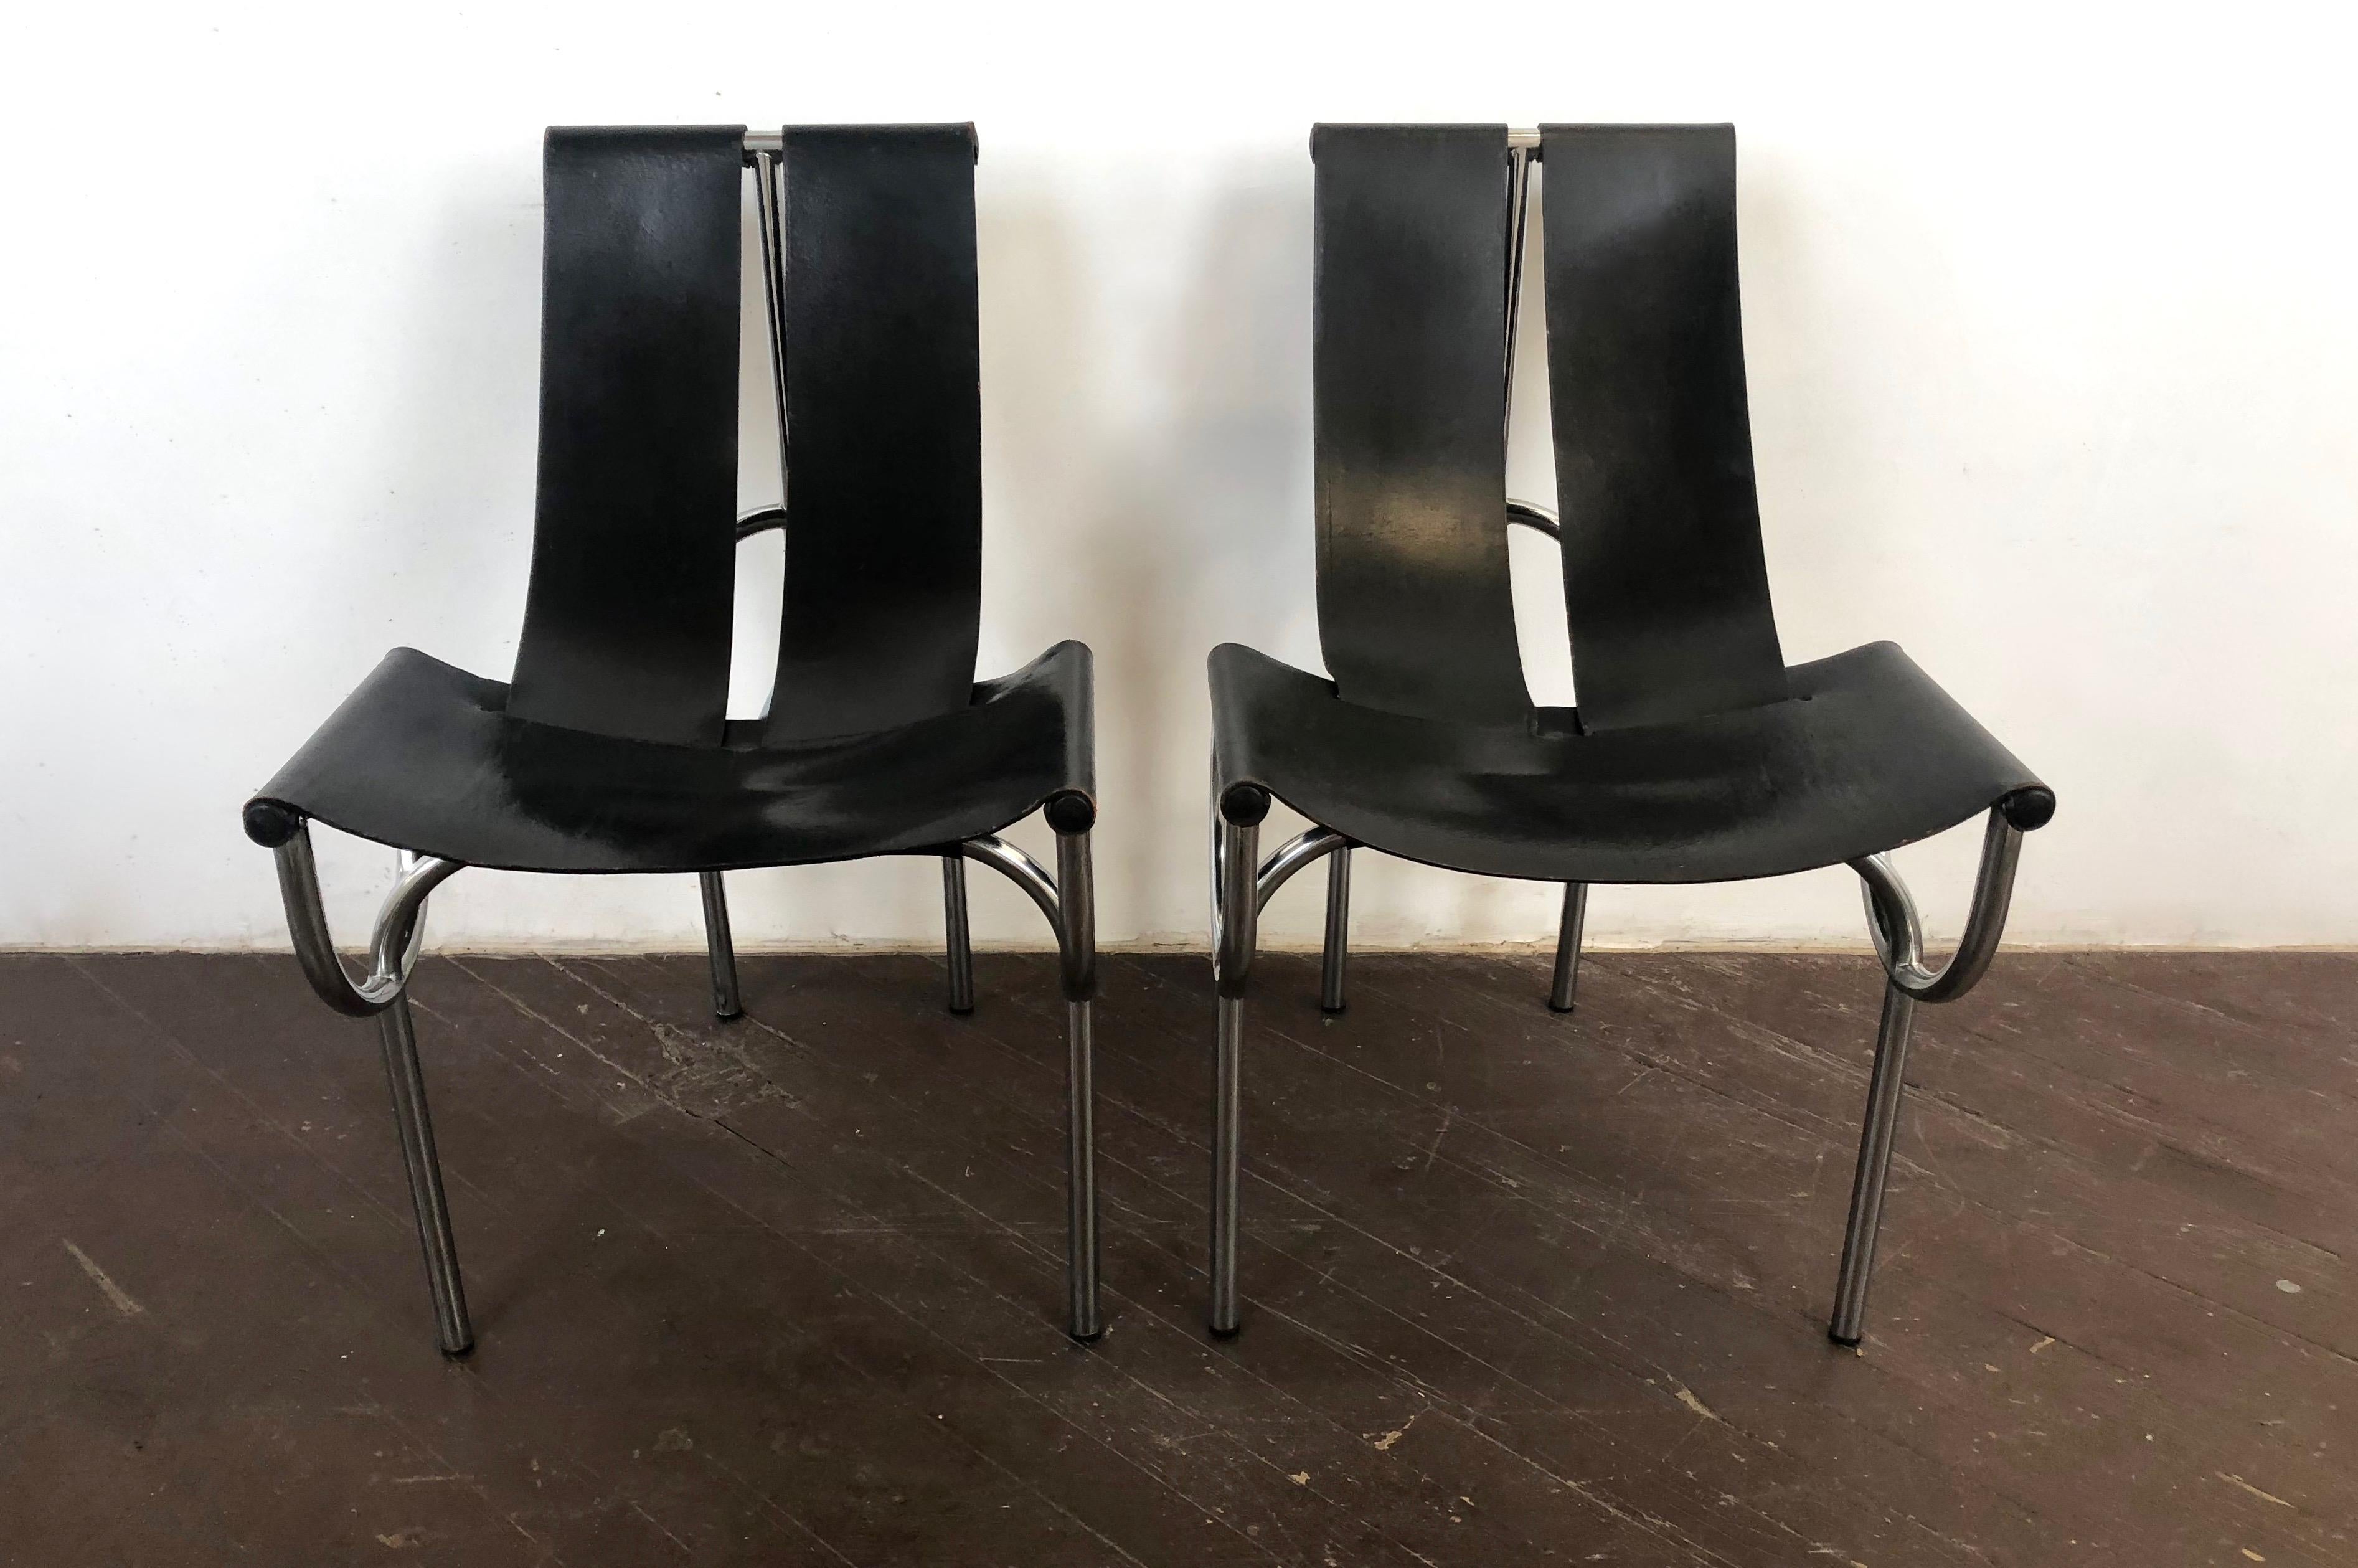 Pair of TRI 15 Chairs by Roberto Gabetti & AImaro Isola for Arbo, Italy, 1968 For Sale 7